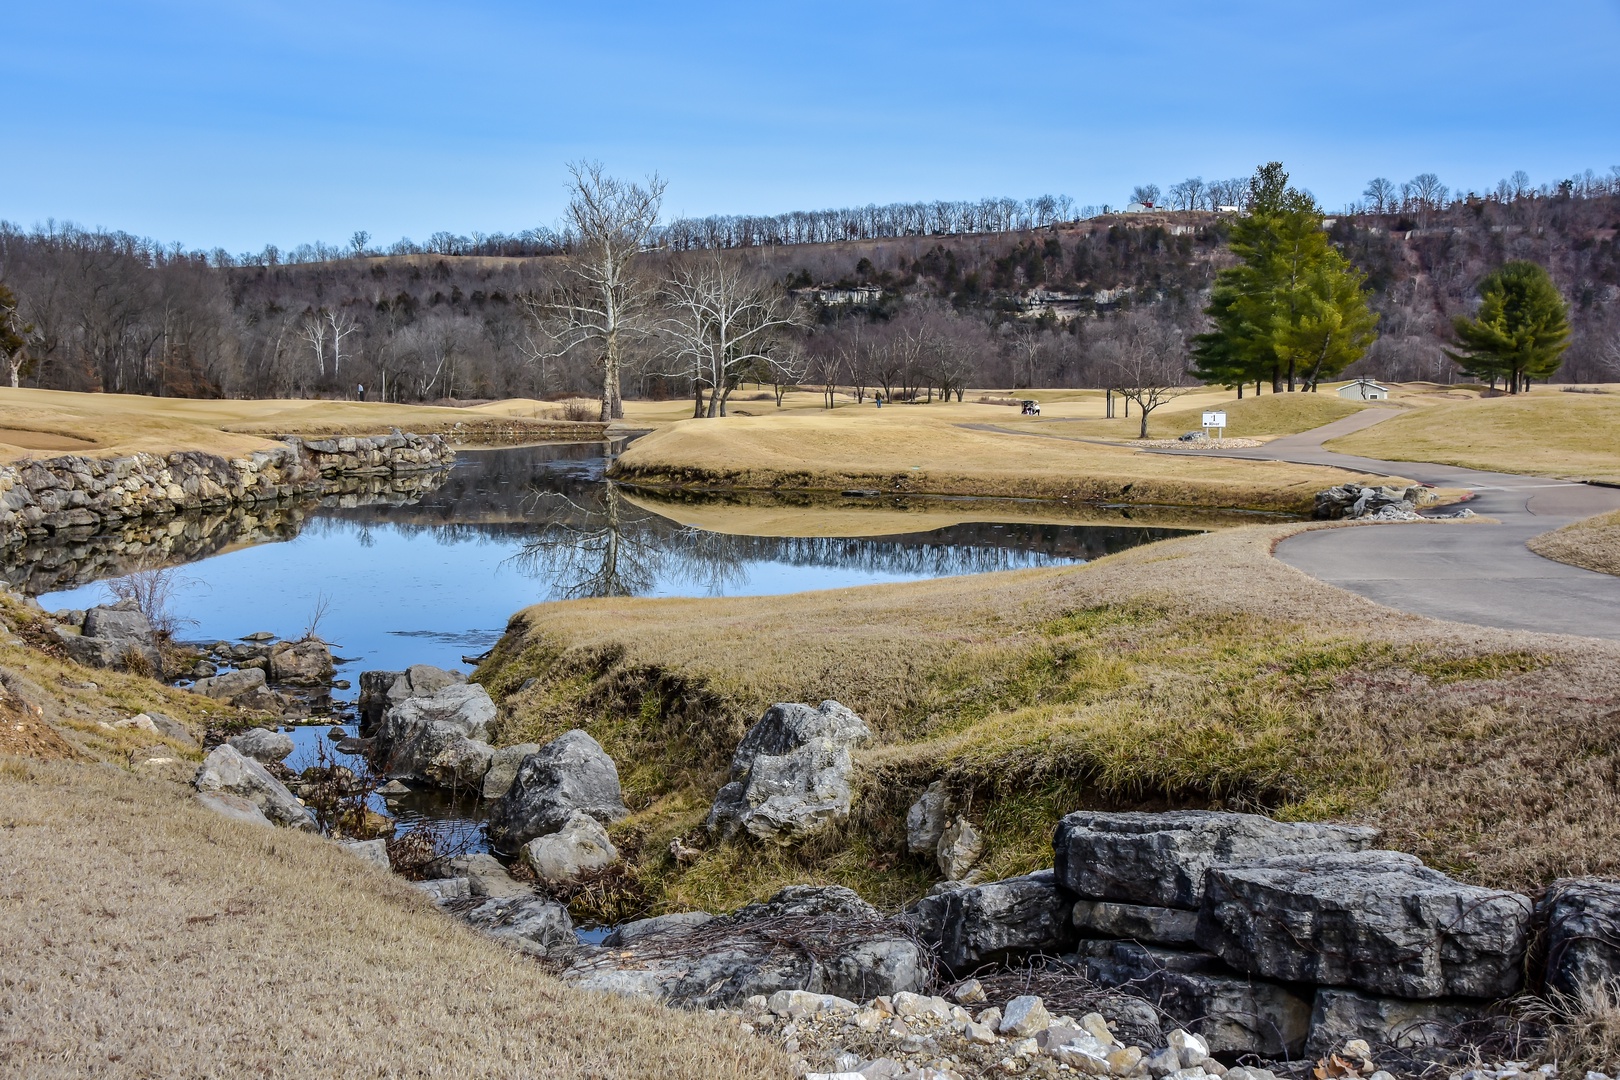 Break out the clubs & practice your swing at Osage National Golf Club!